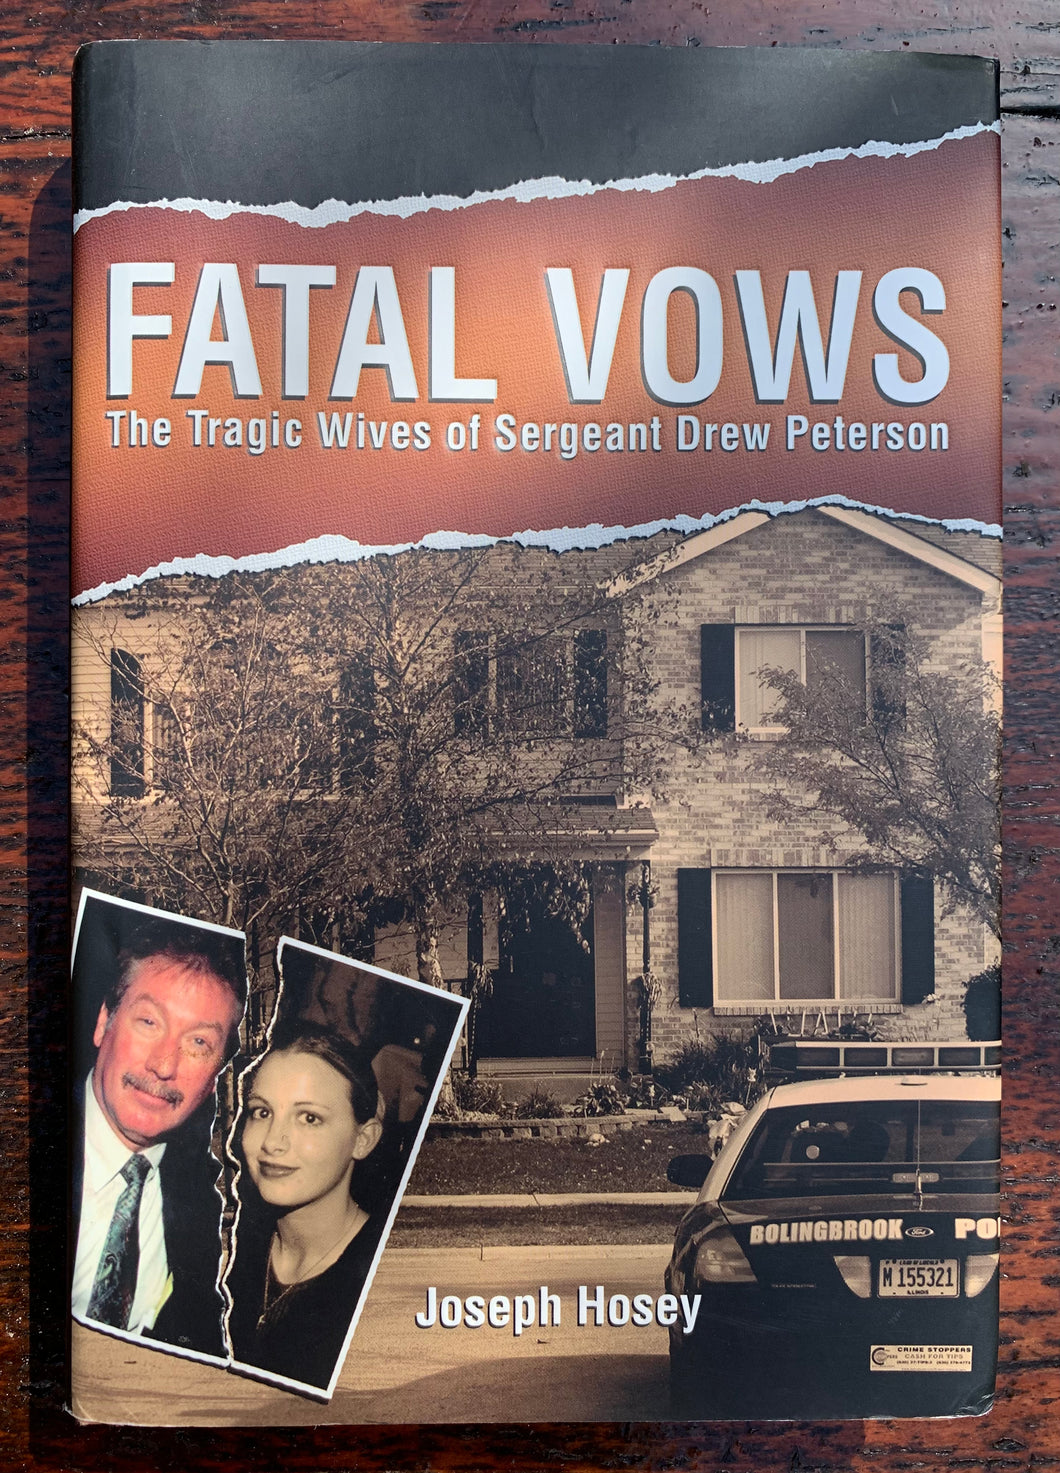 Fatal Vows: The Tragic Wives of Sergeant Drew Peterson